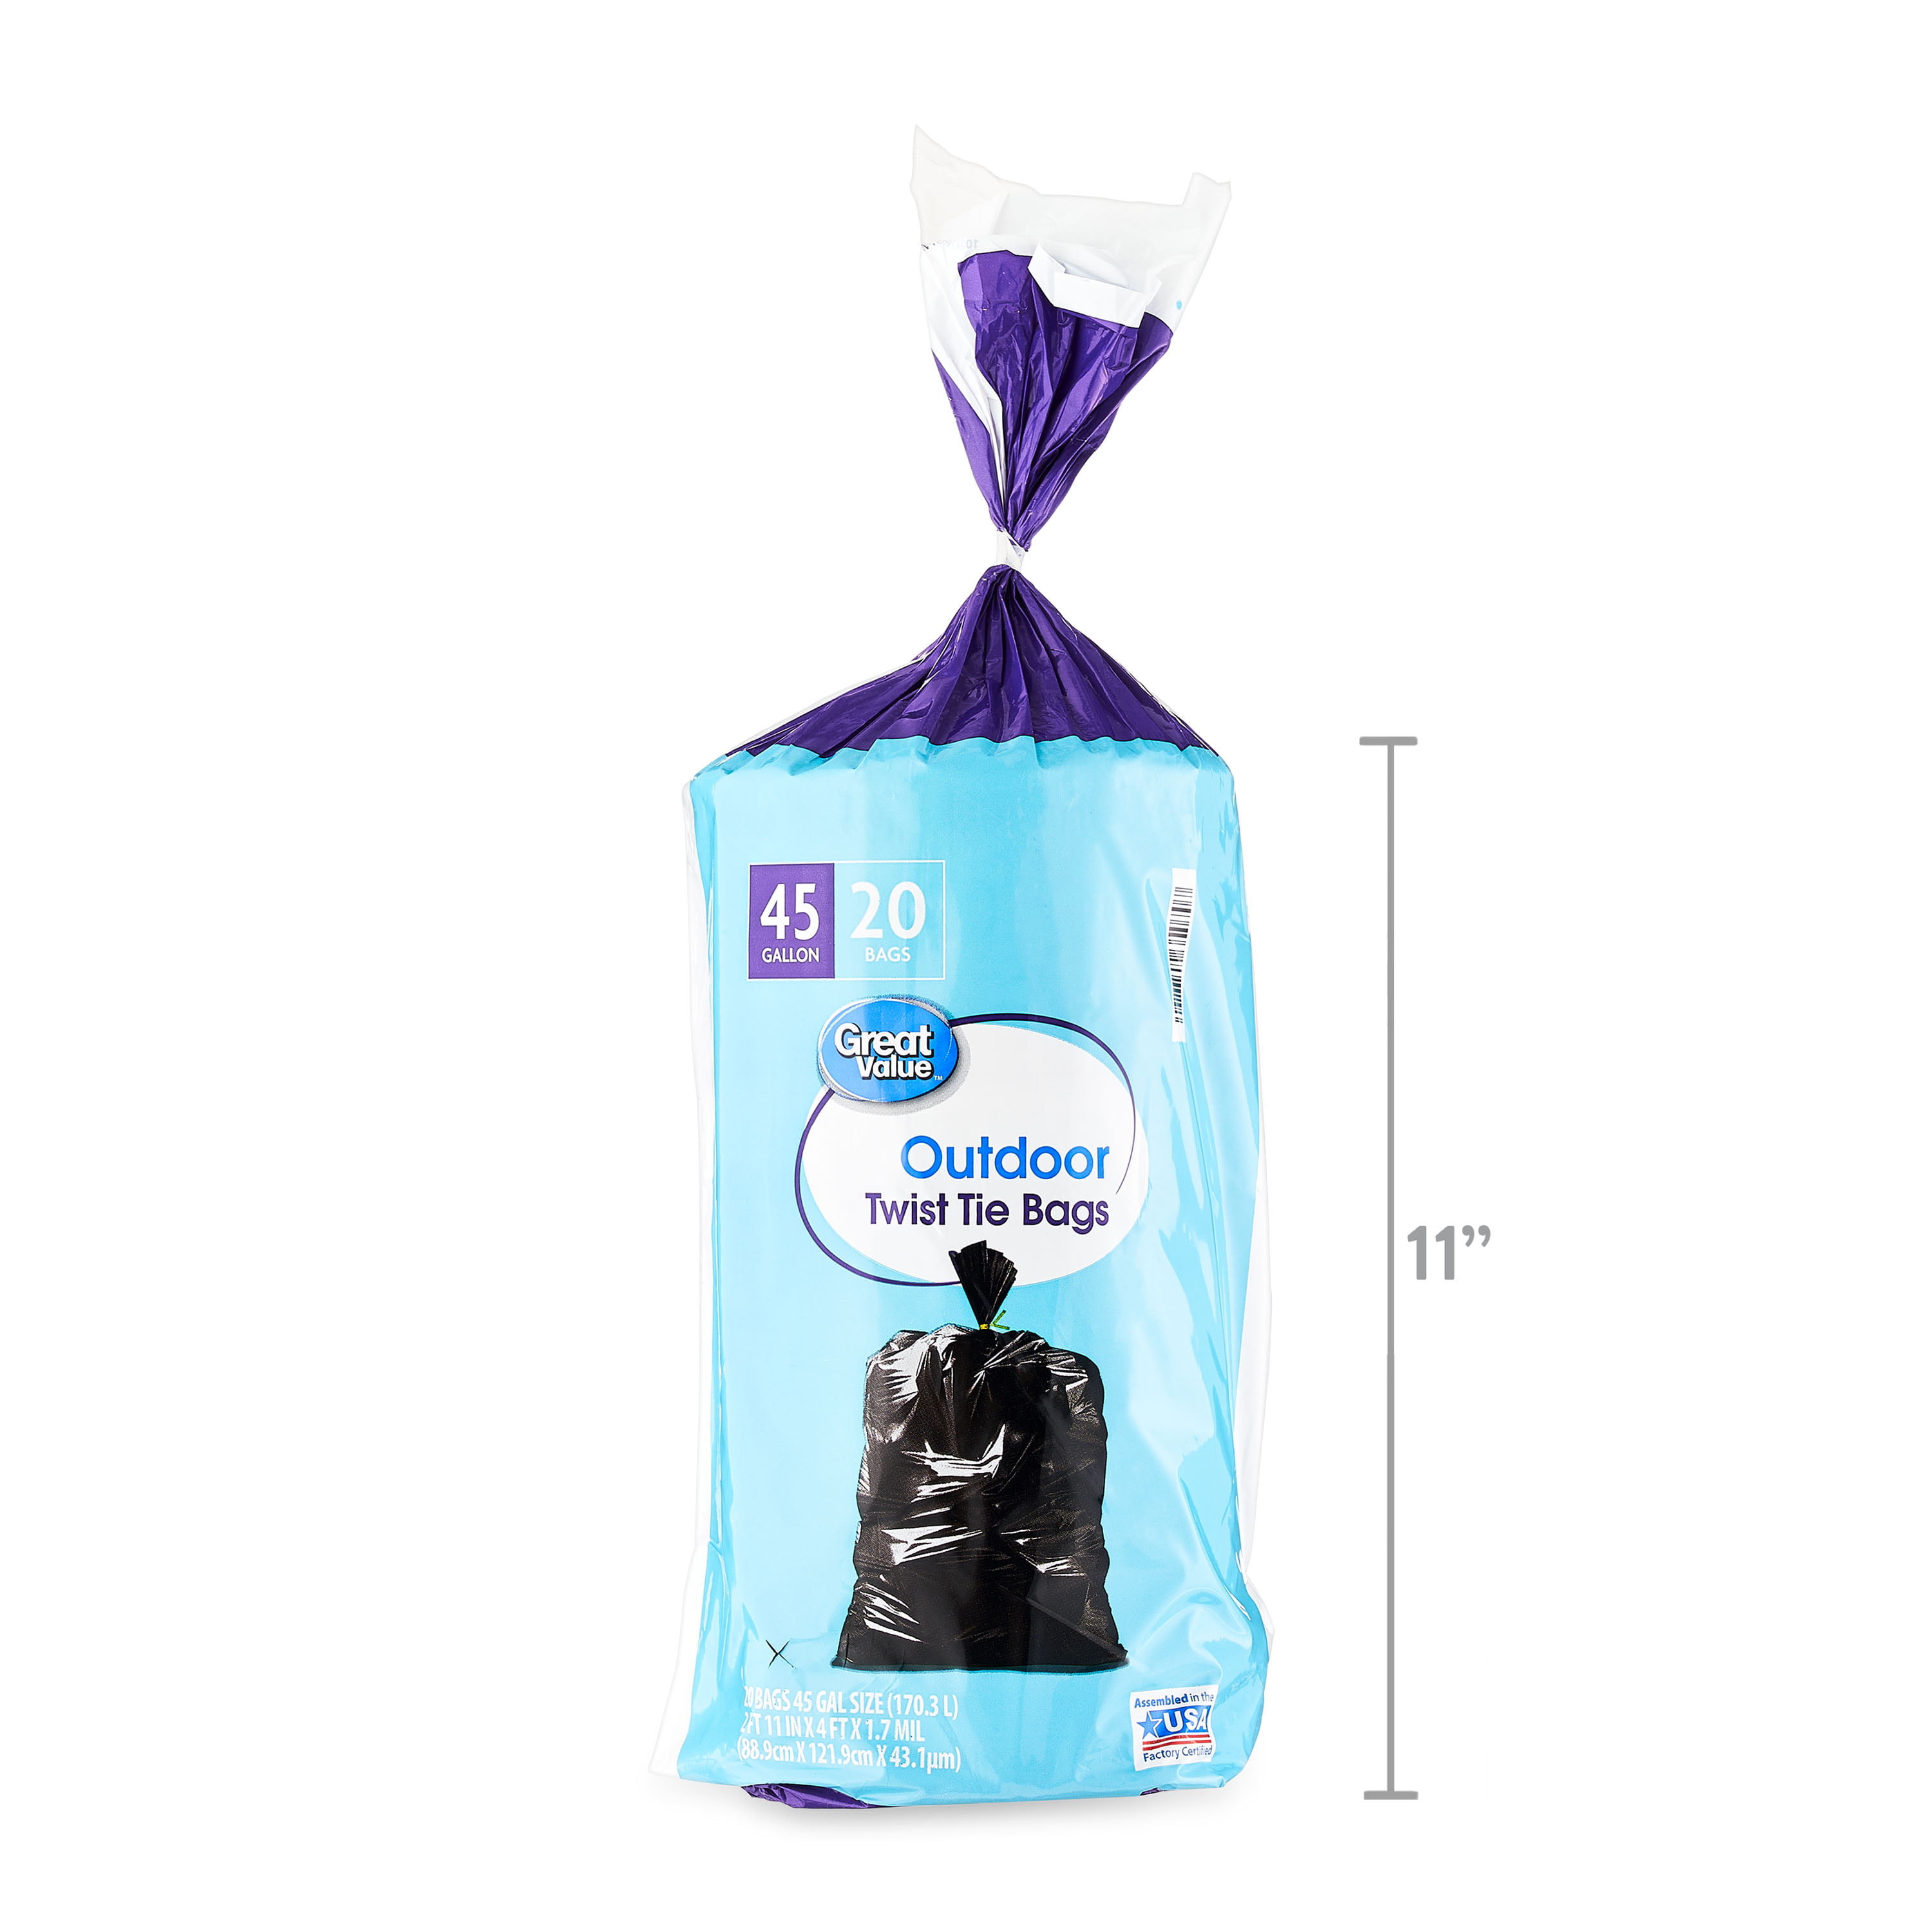 Signature SELECT Garbage Bags Medium With Twist Tie 8 Gallon - 20 Count -  Safeway